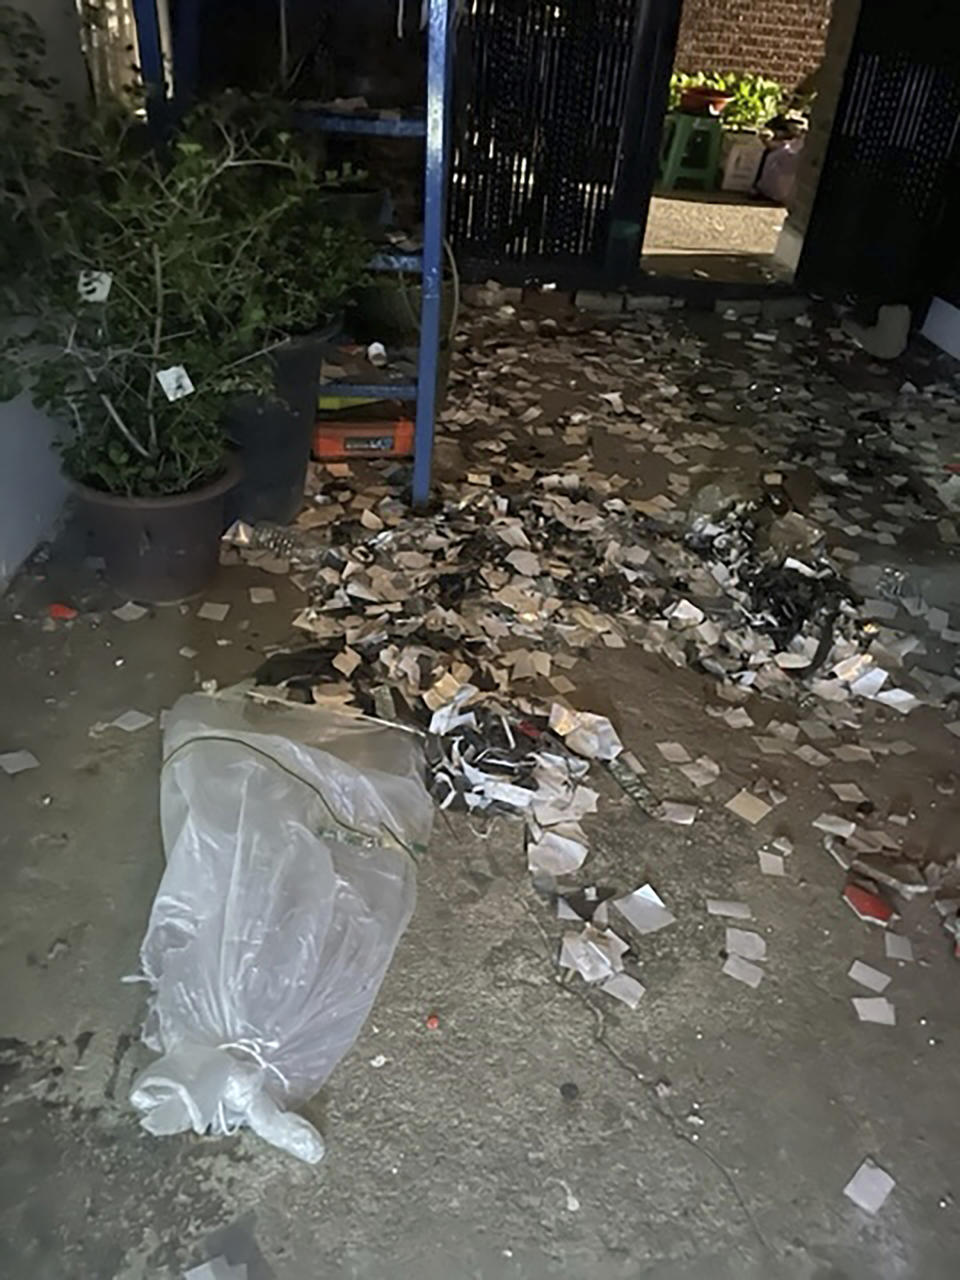 This photo provided by South Korea Defense Ministry, shows trash from a balloon presumably sent by North Korea, in Seoul, South Korea, Wednesday, May 29, 2024. In another sign of tensions between the war-divided rivals, South Korea's Joint Chiefs of Staff said North Korea also has been flying large numbers of balloons carrying trash toward the South since Tuesday night, in an apparent retaliation against South Korean activists for flying anti-Pyongyang propaganda leaflets across the border. (South Korea Presidential Office via AP)